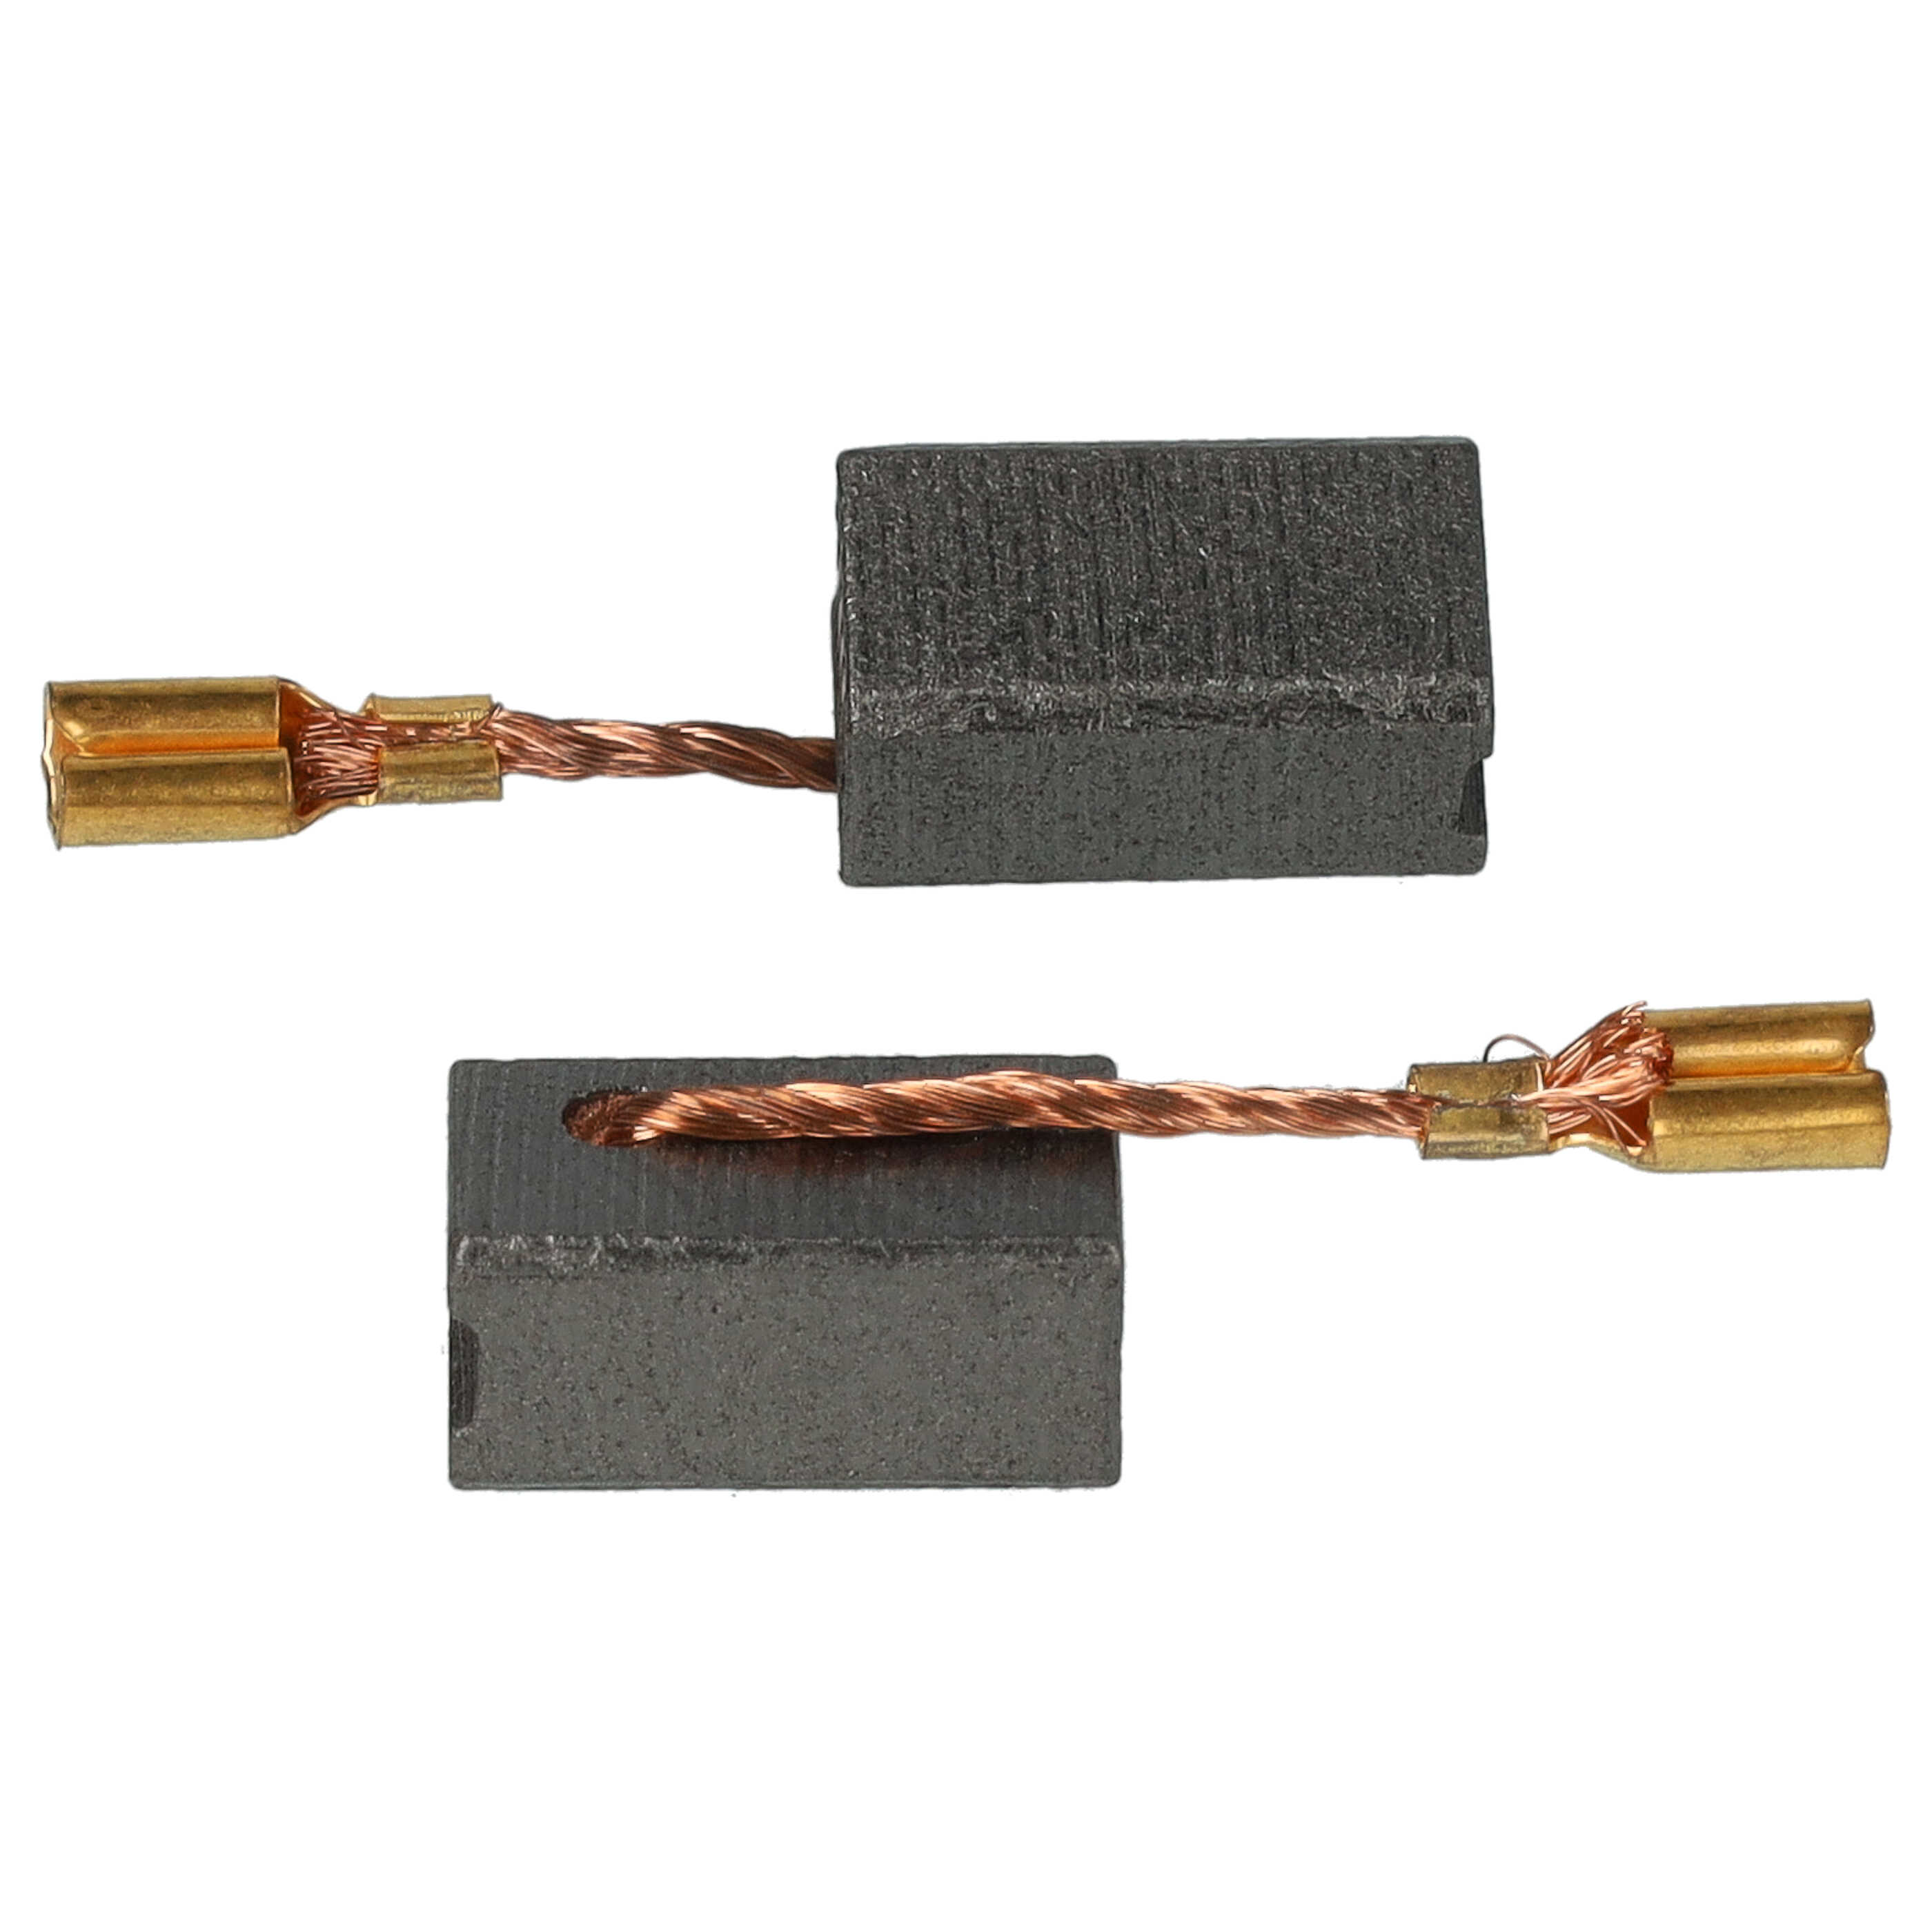 2x Carbon Brush as Replacement for Bosch 1619P02870 Electric Power Tools, 13 x 6.5 x 8mm